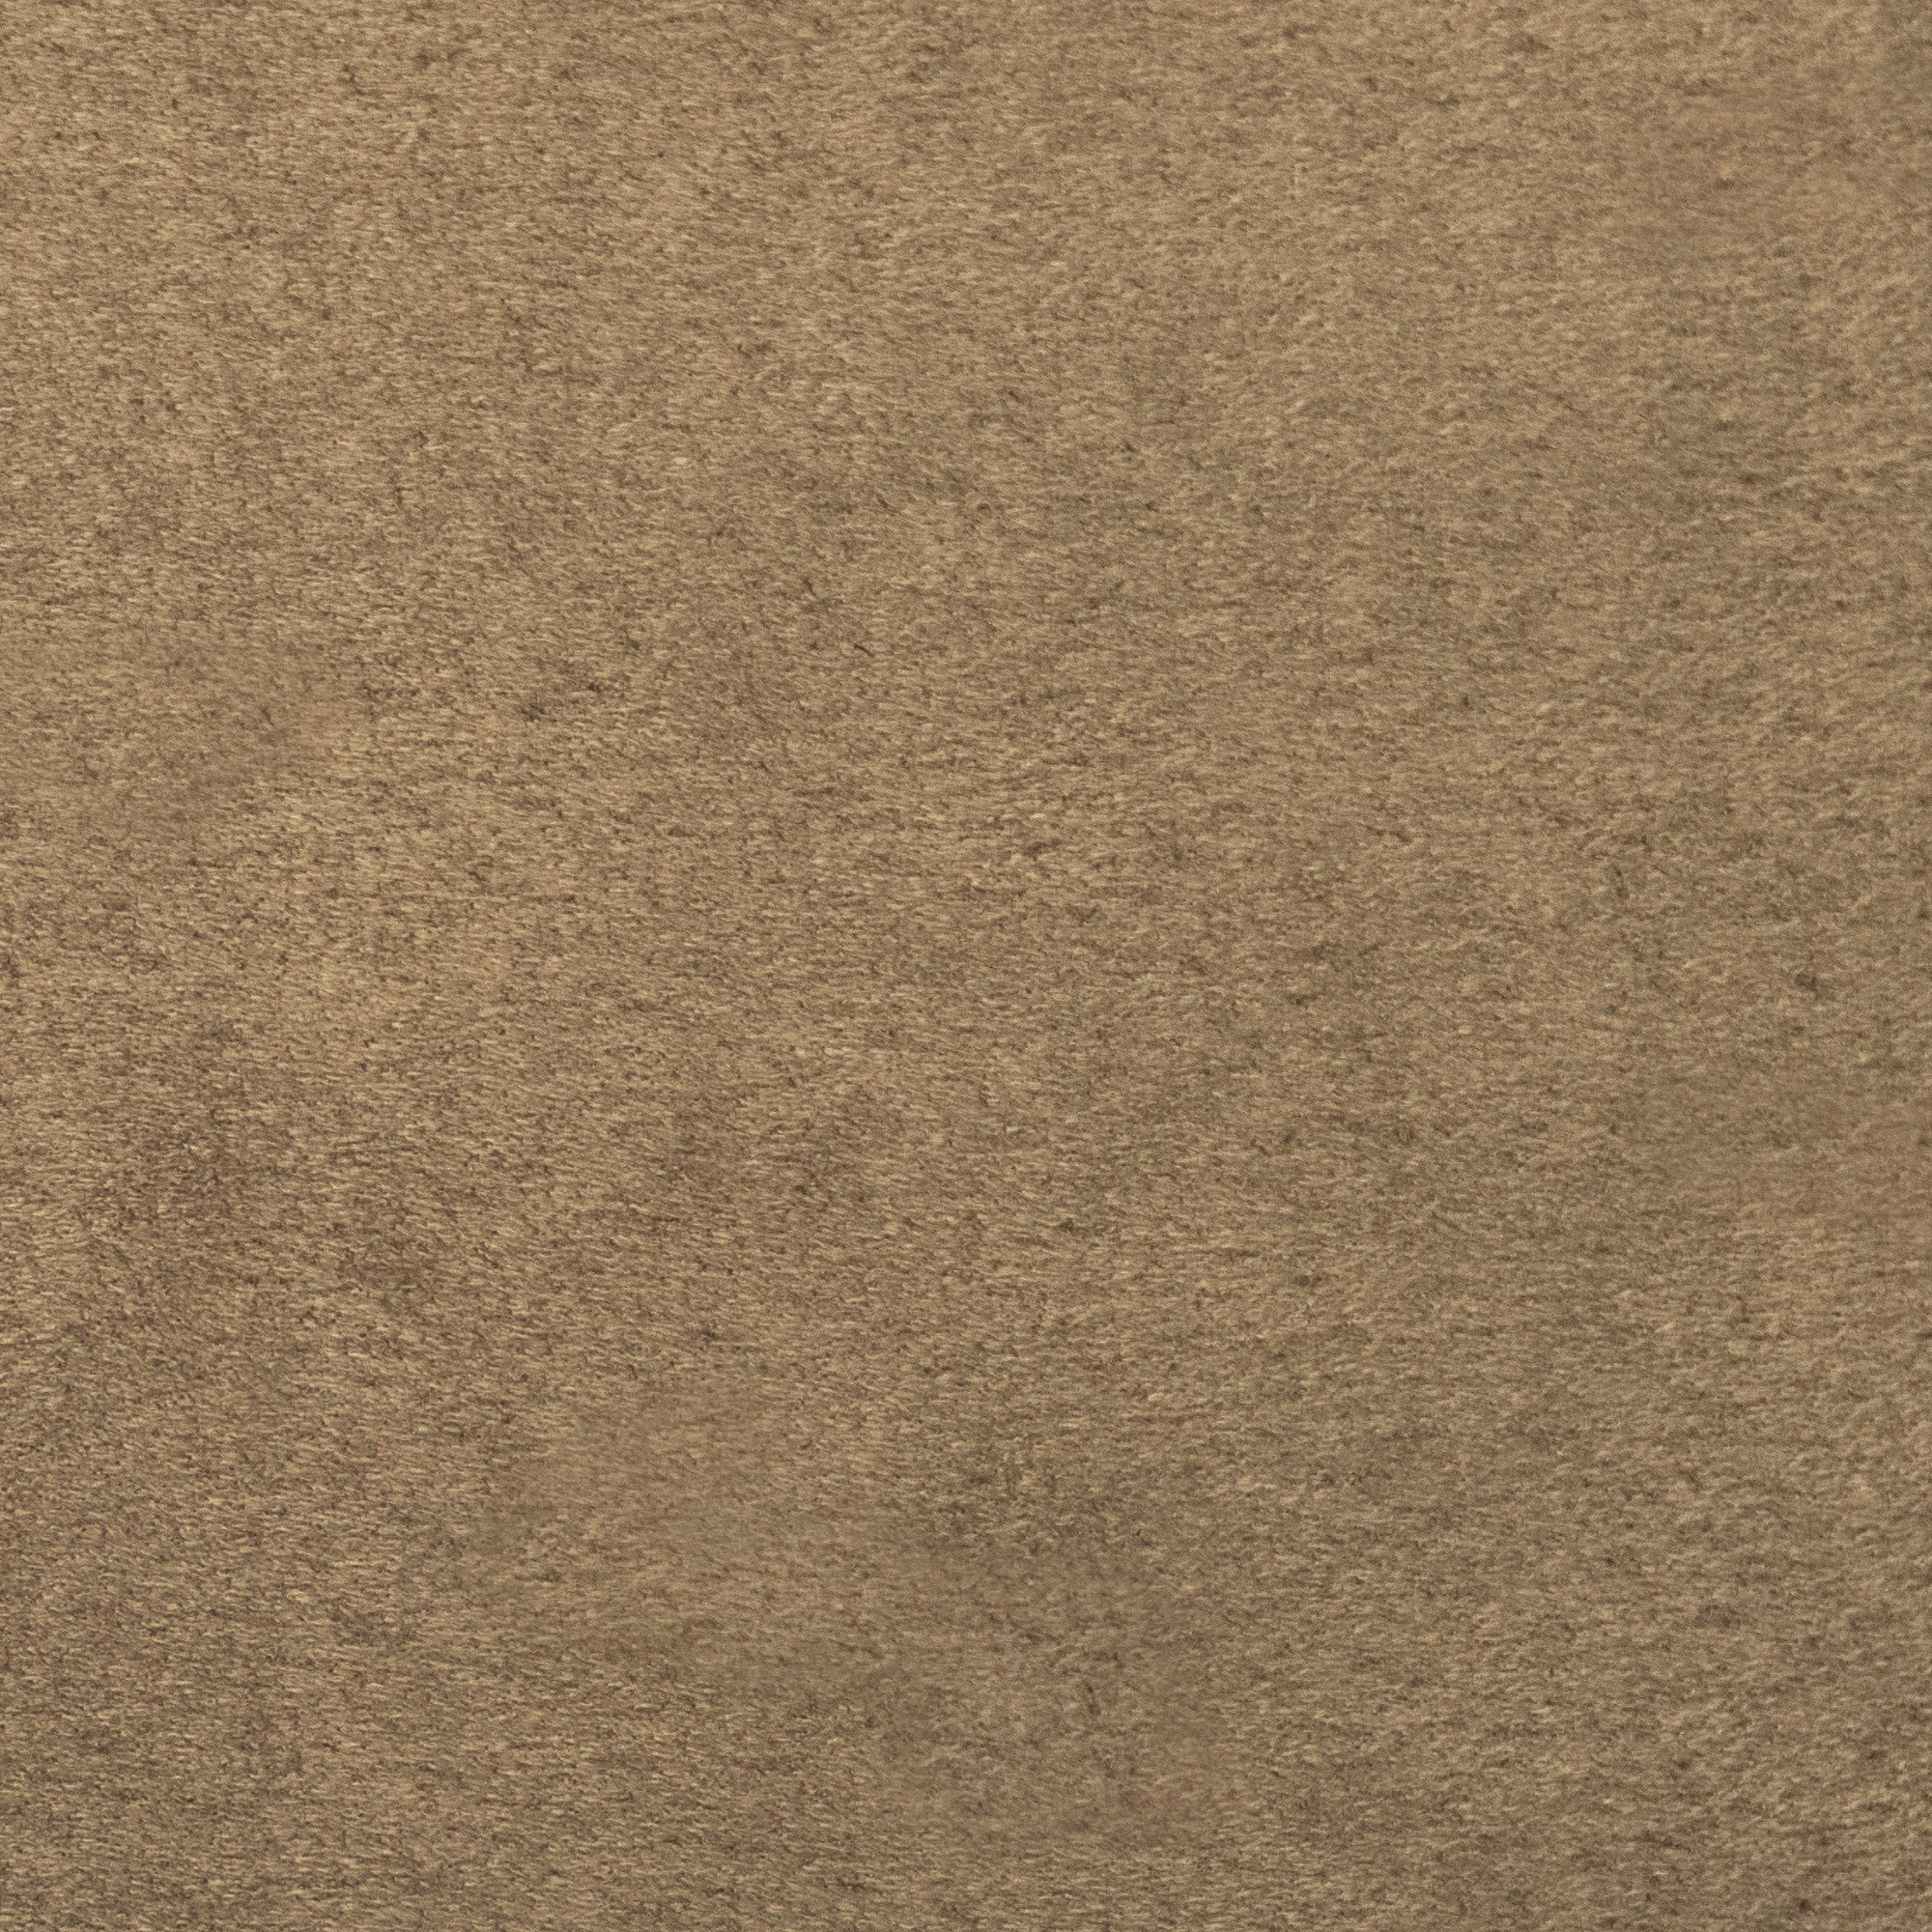 Vintage Suede Brown | Medium Weight Faux Suede Fabric | Home Decor Fabric |  58 Wide